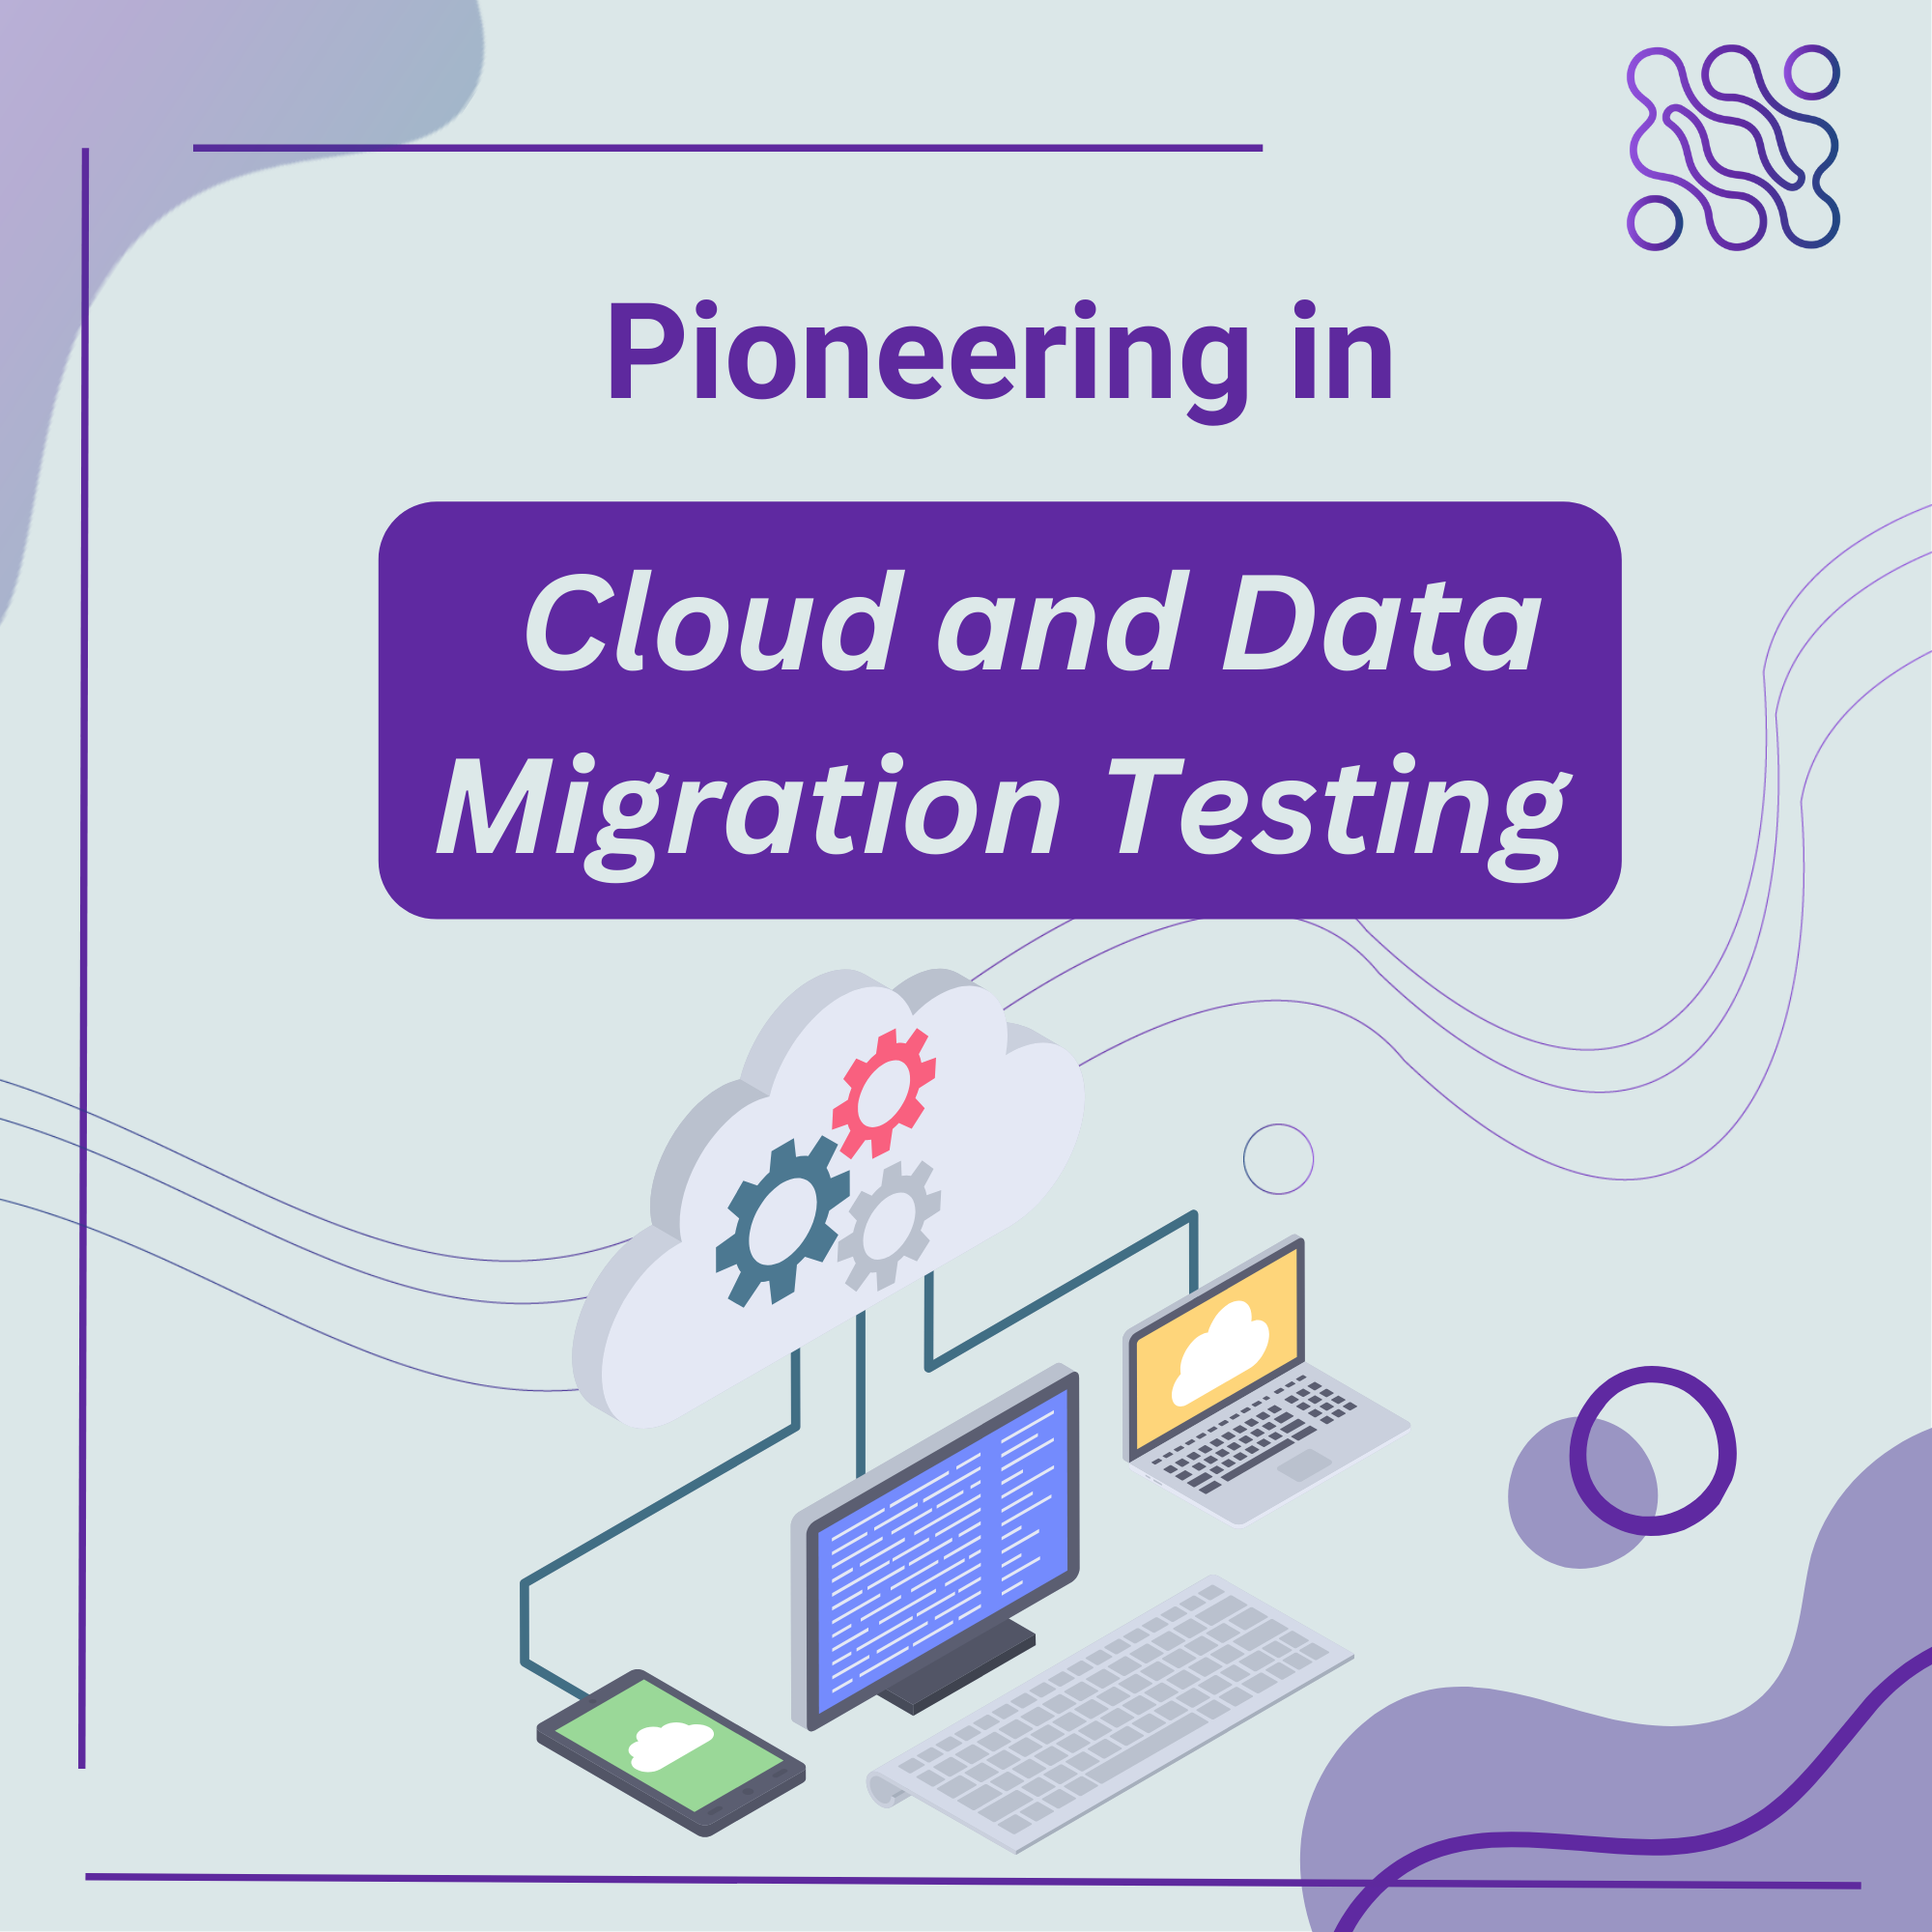 Cloud and Data Migration Testing